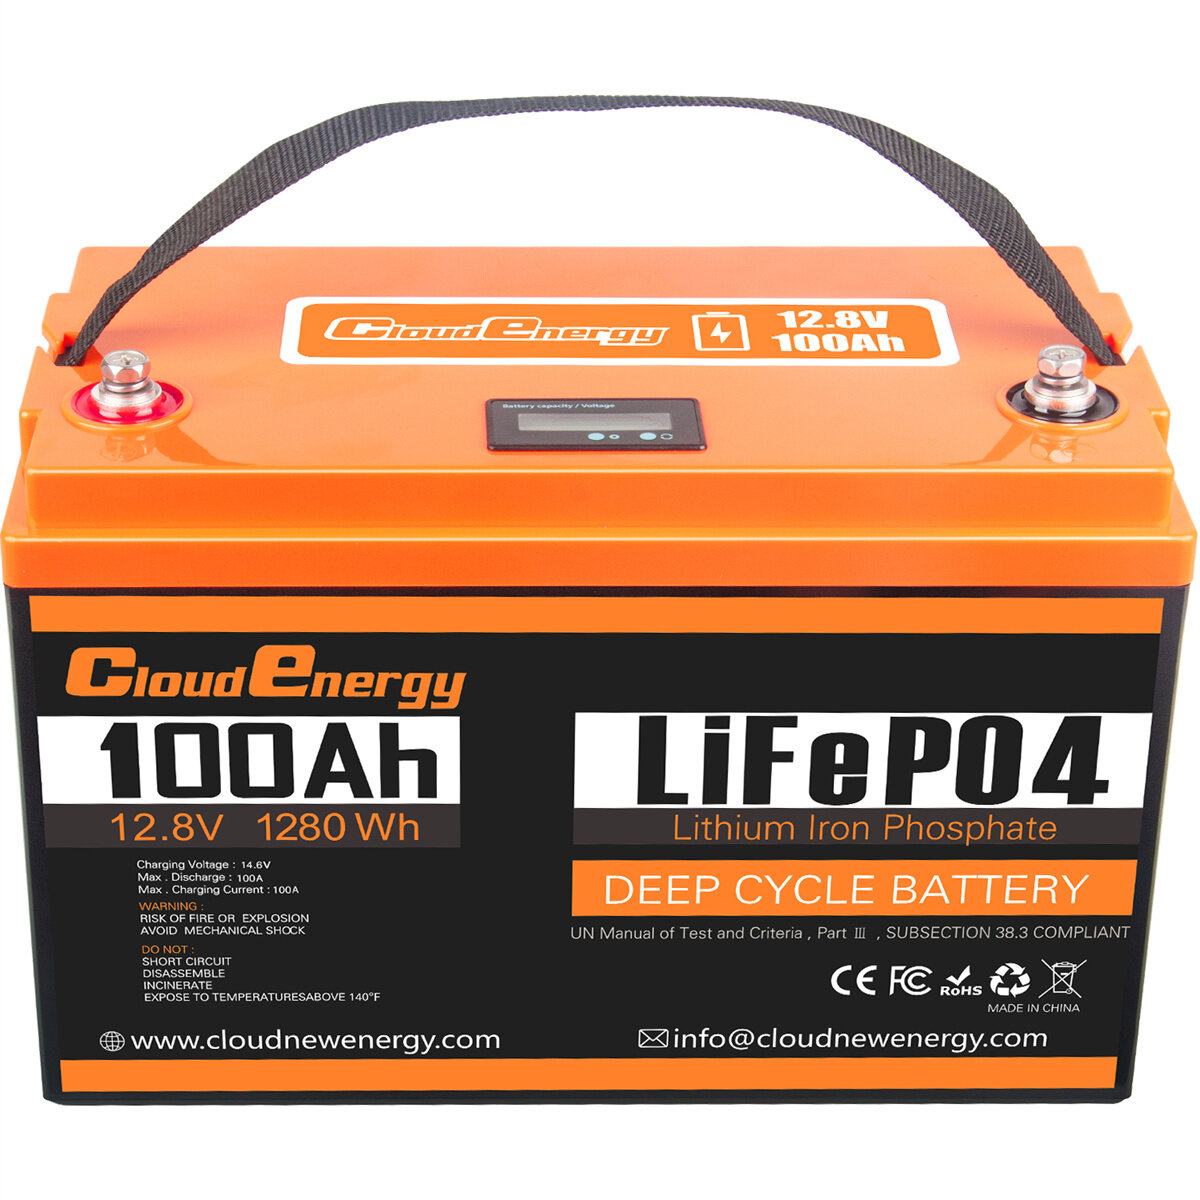 Image of [EU Direct] Cloudenergy 12V 100Ah LiFePO4 Lithium Battery Pack Backup Power 1280Wh Energy 6000+ Deep Cycles Built-in 100